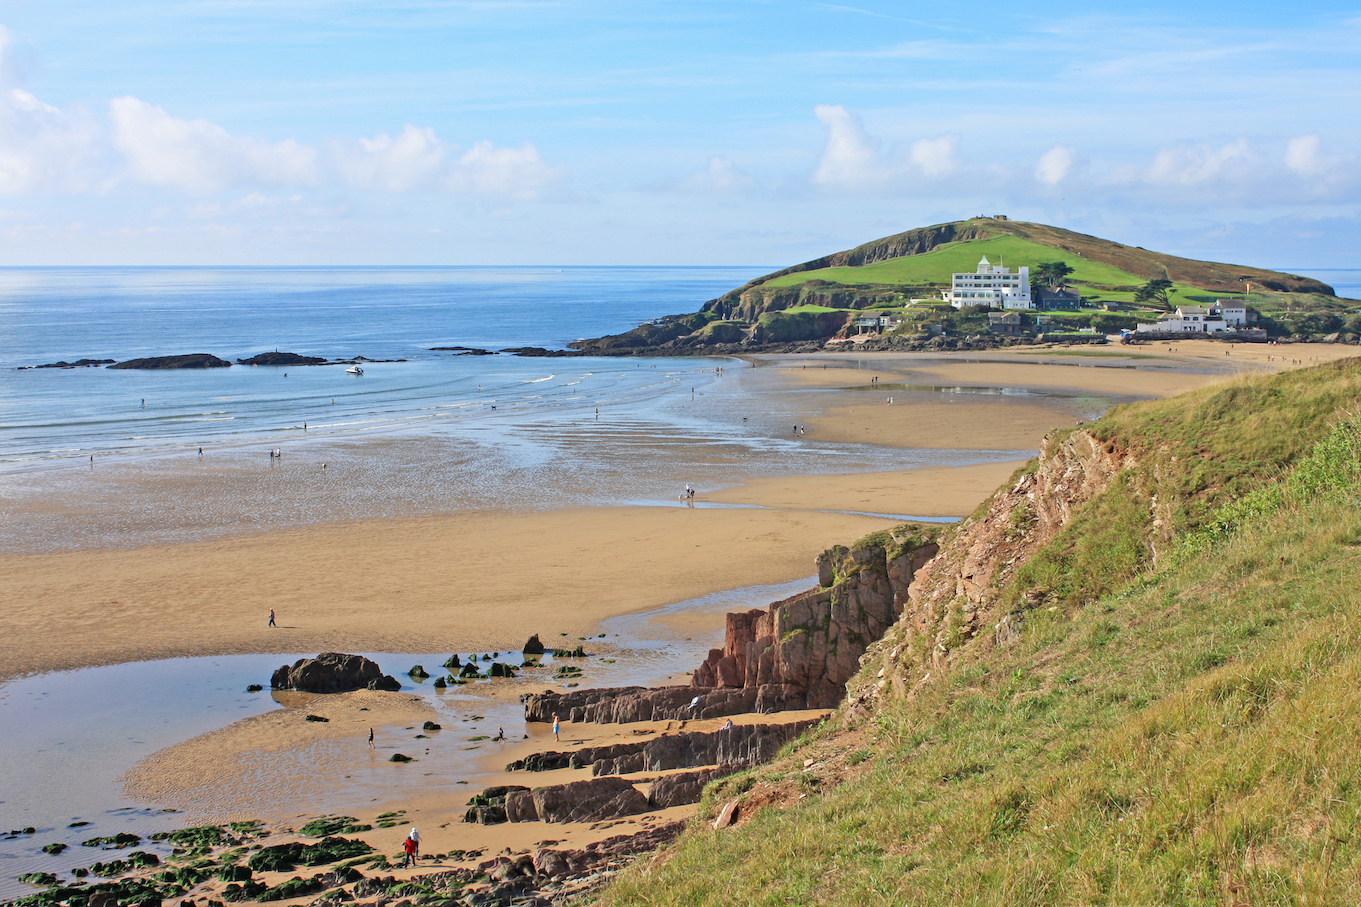 Burgh Island hotel is located on the private Burgh Island